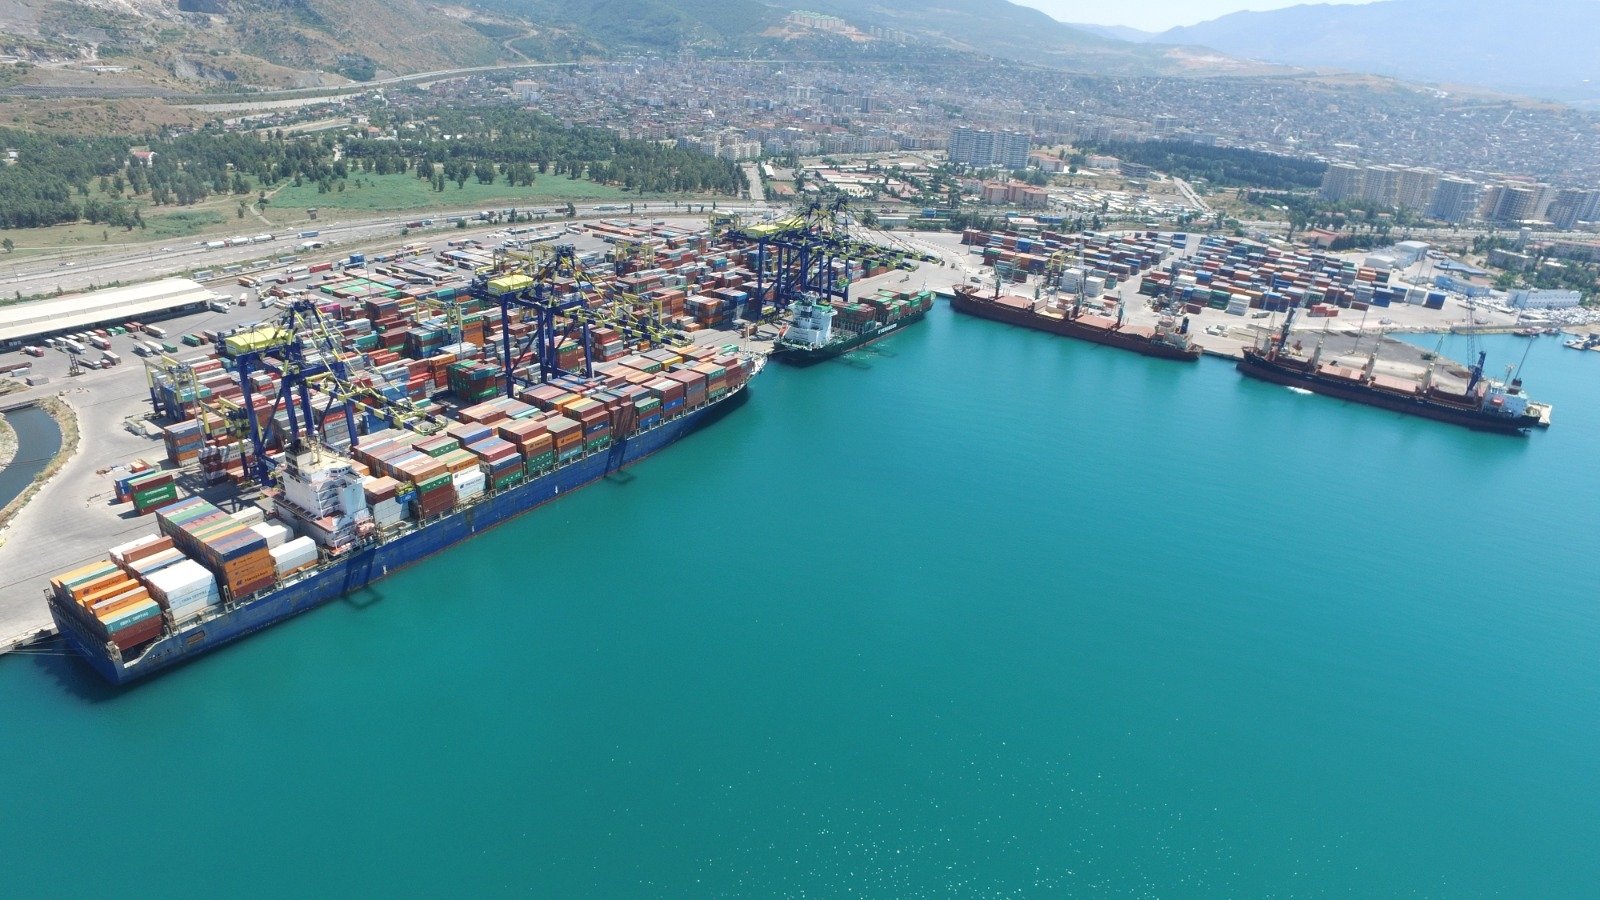 A general view of LimakPort Iskenderun International Port in southern Hatay province, Turkey, Aug. 12, 2020. (AA Photo)